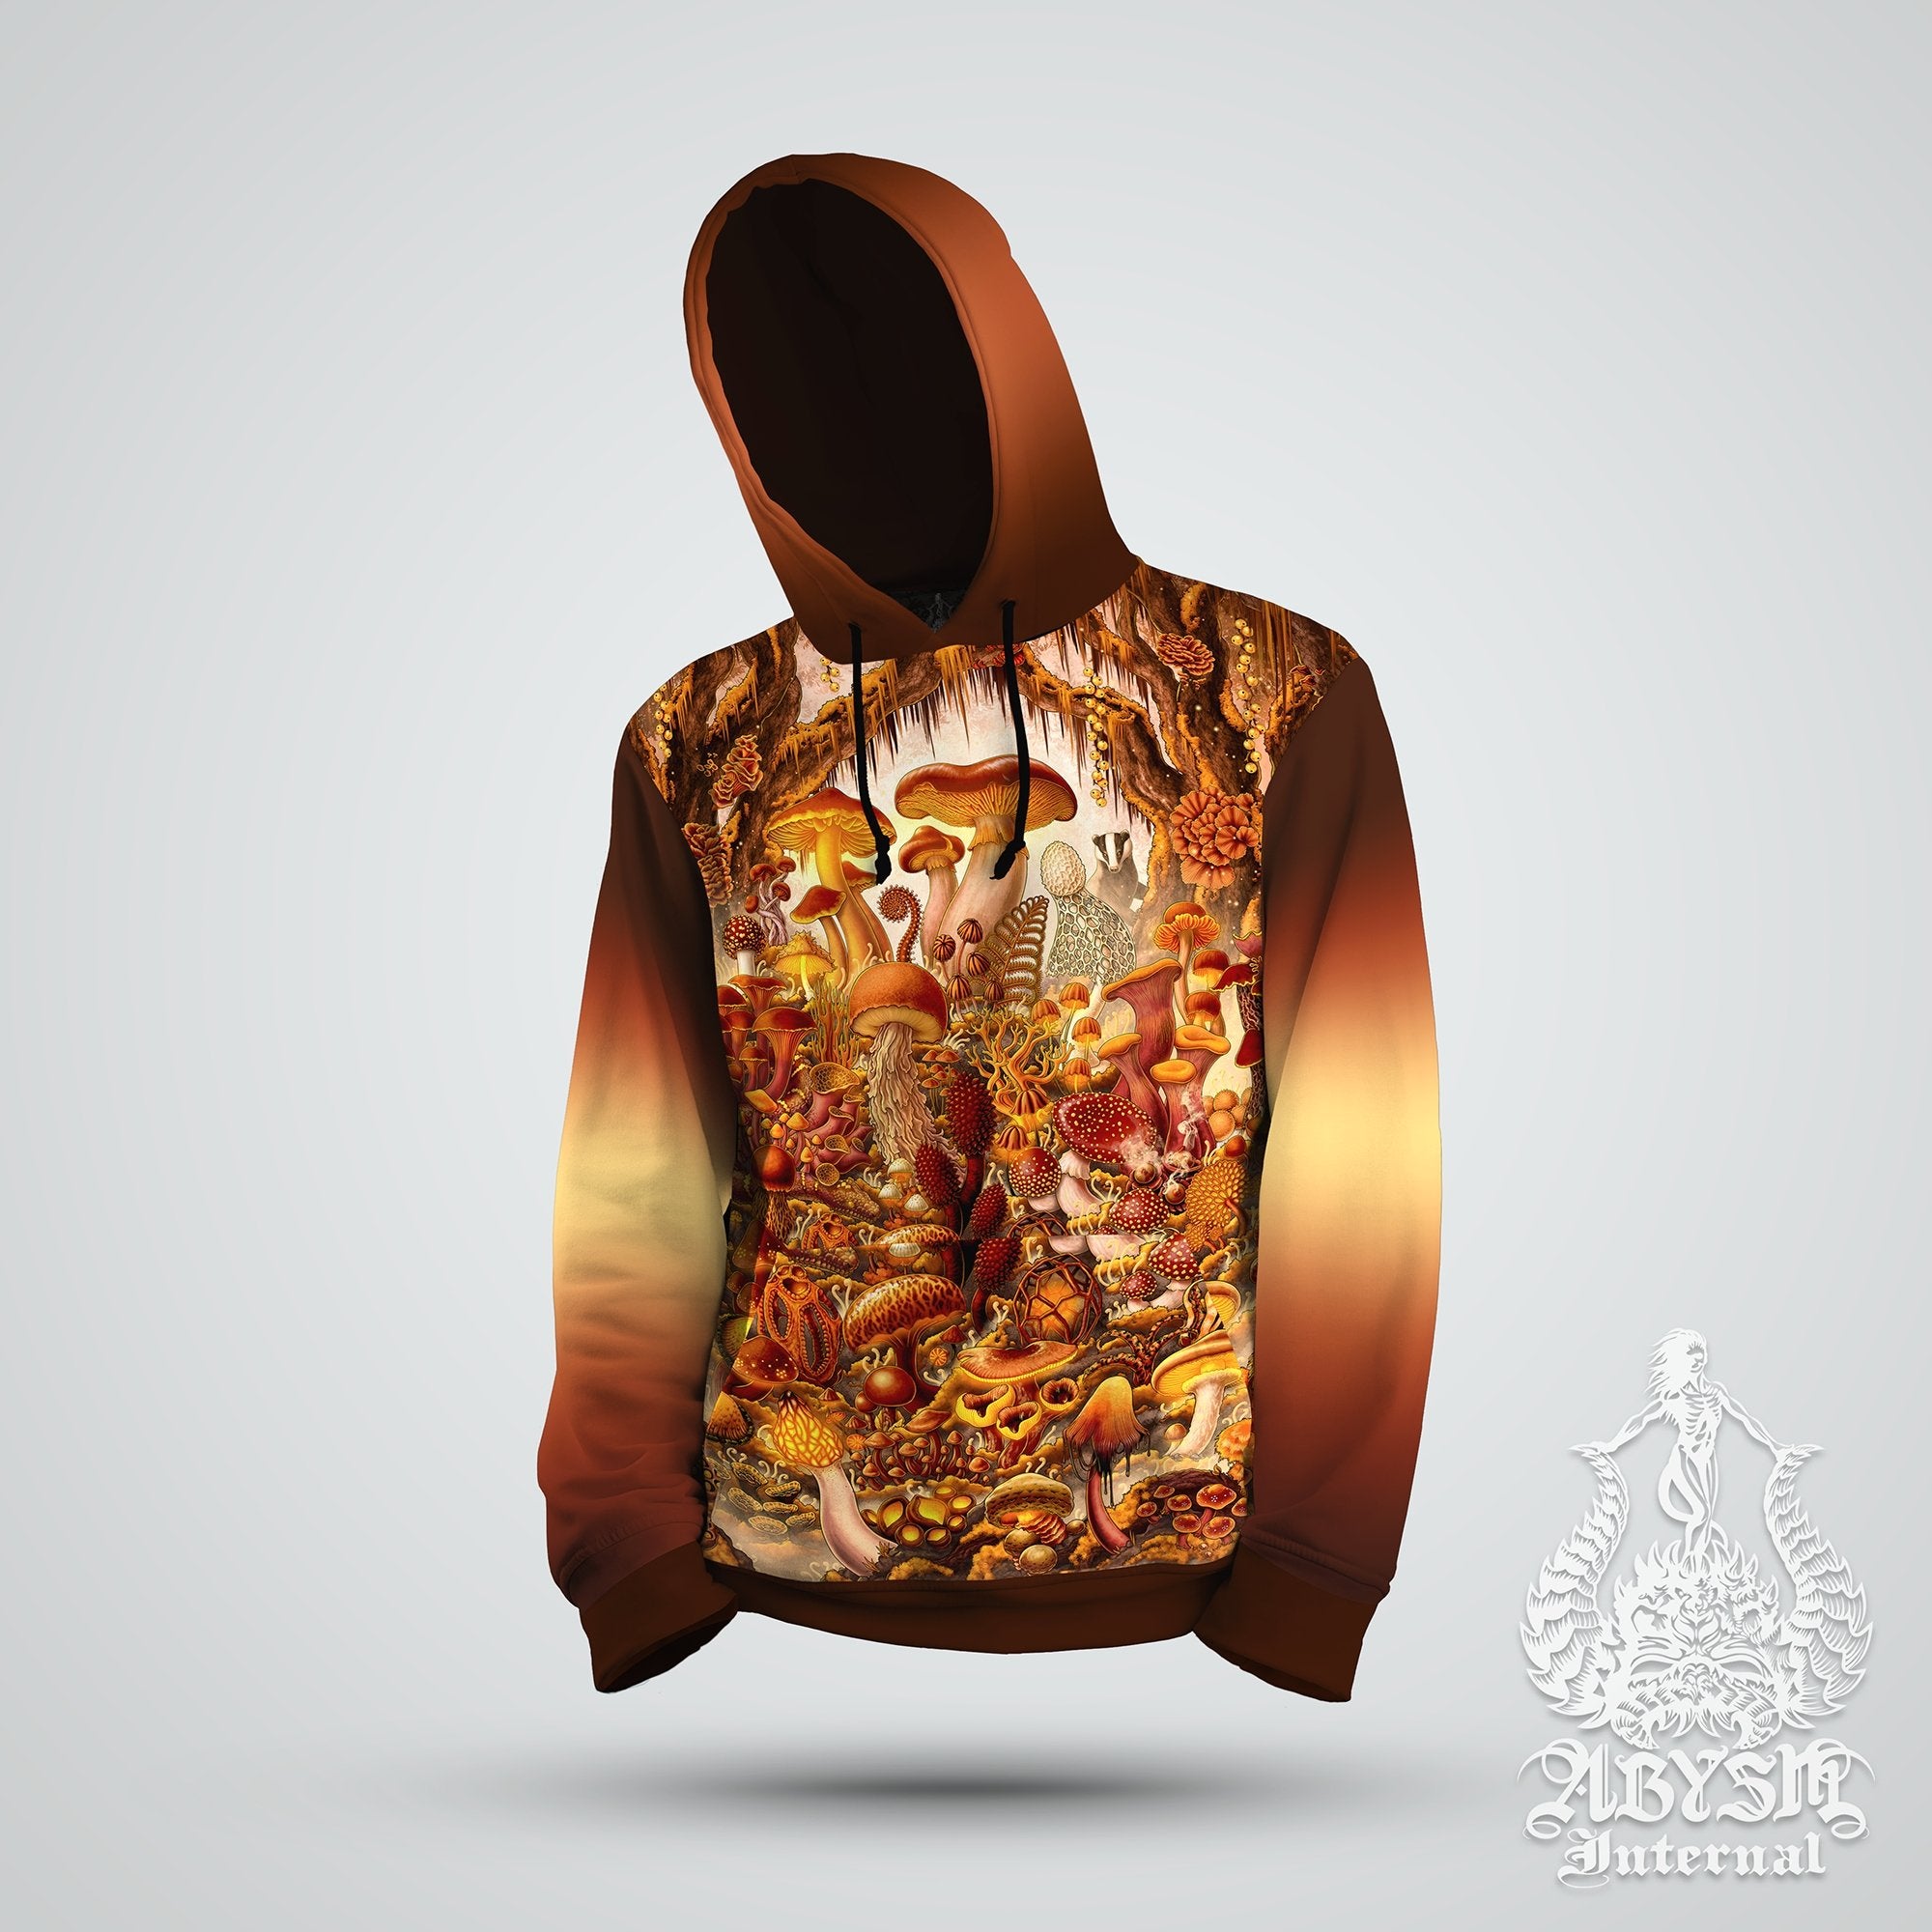 Mushrooms Hoodie, Party Outfit, Indie Festival Streetwear, Alternative Clothing, Unisex, Biology Teacher and Mycologist Gift - Steampunk - Abysm Internal